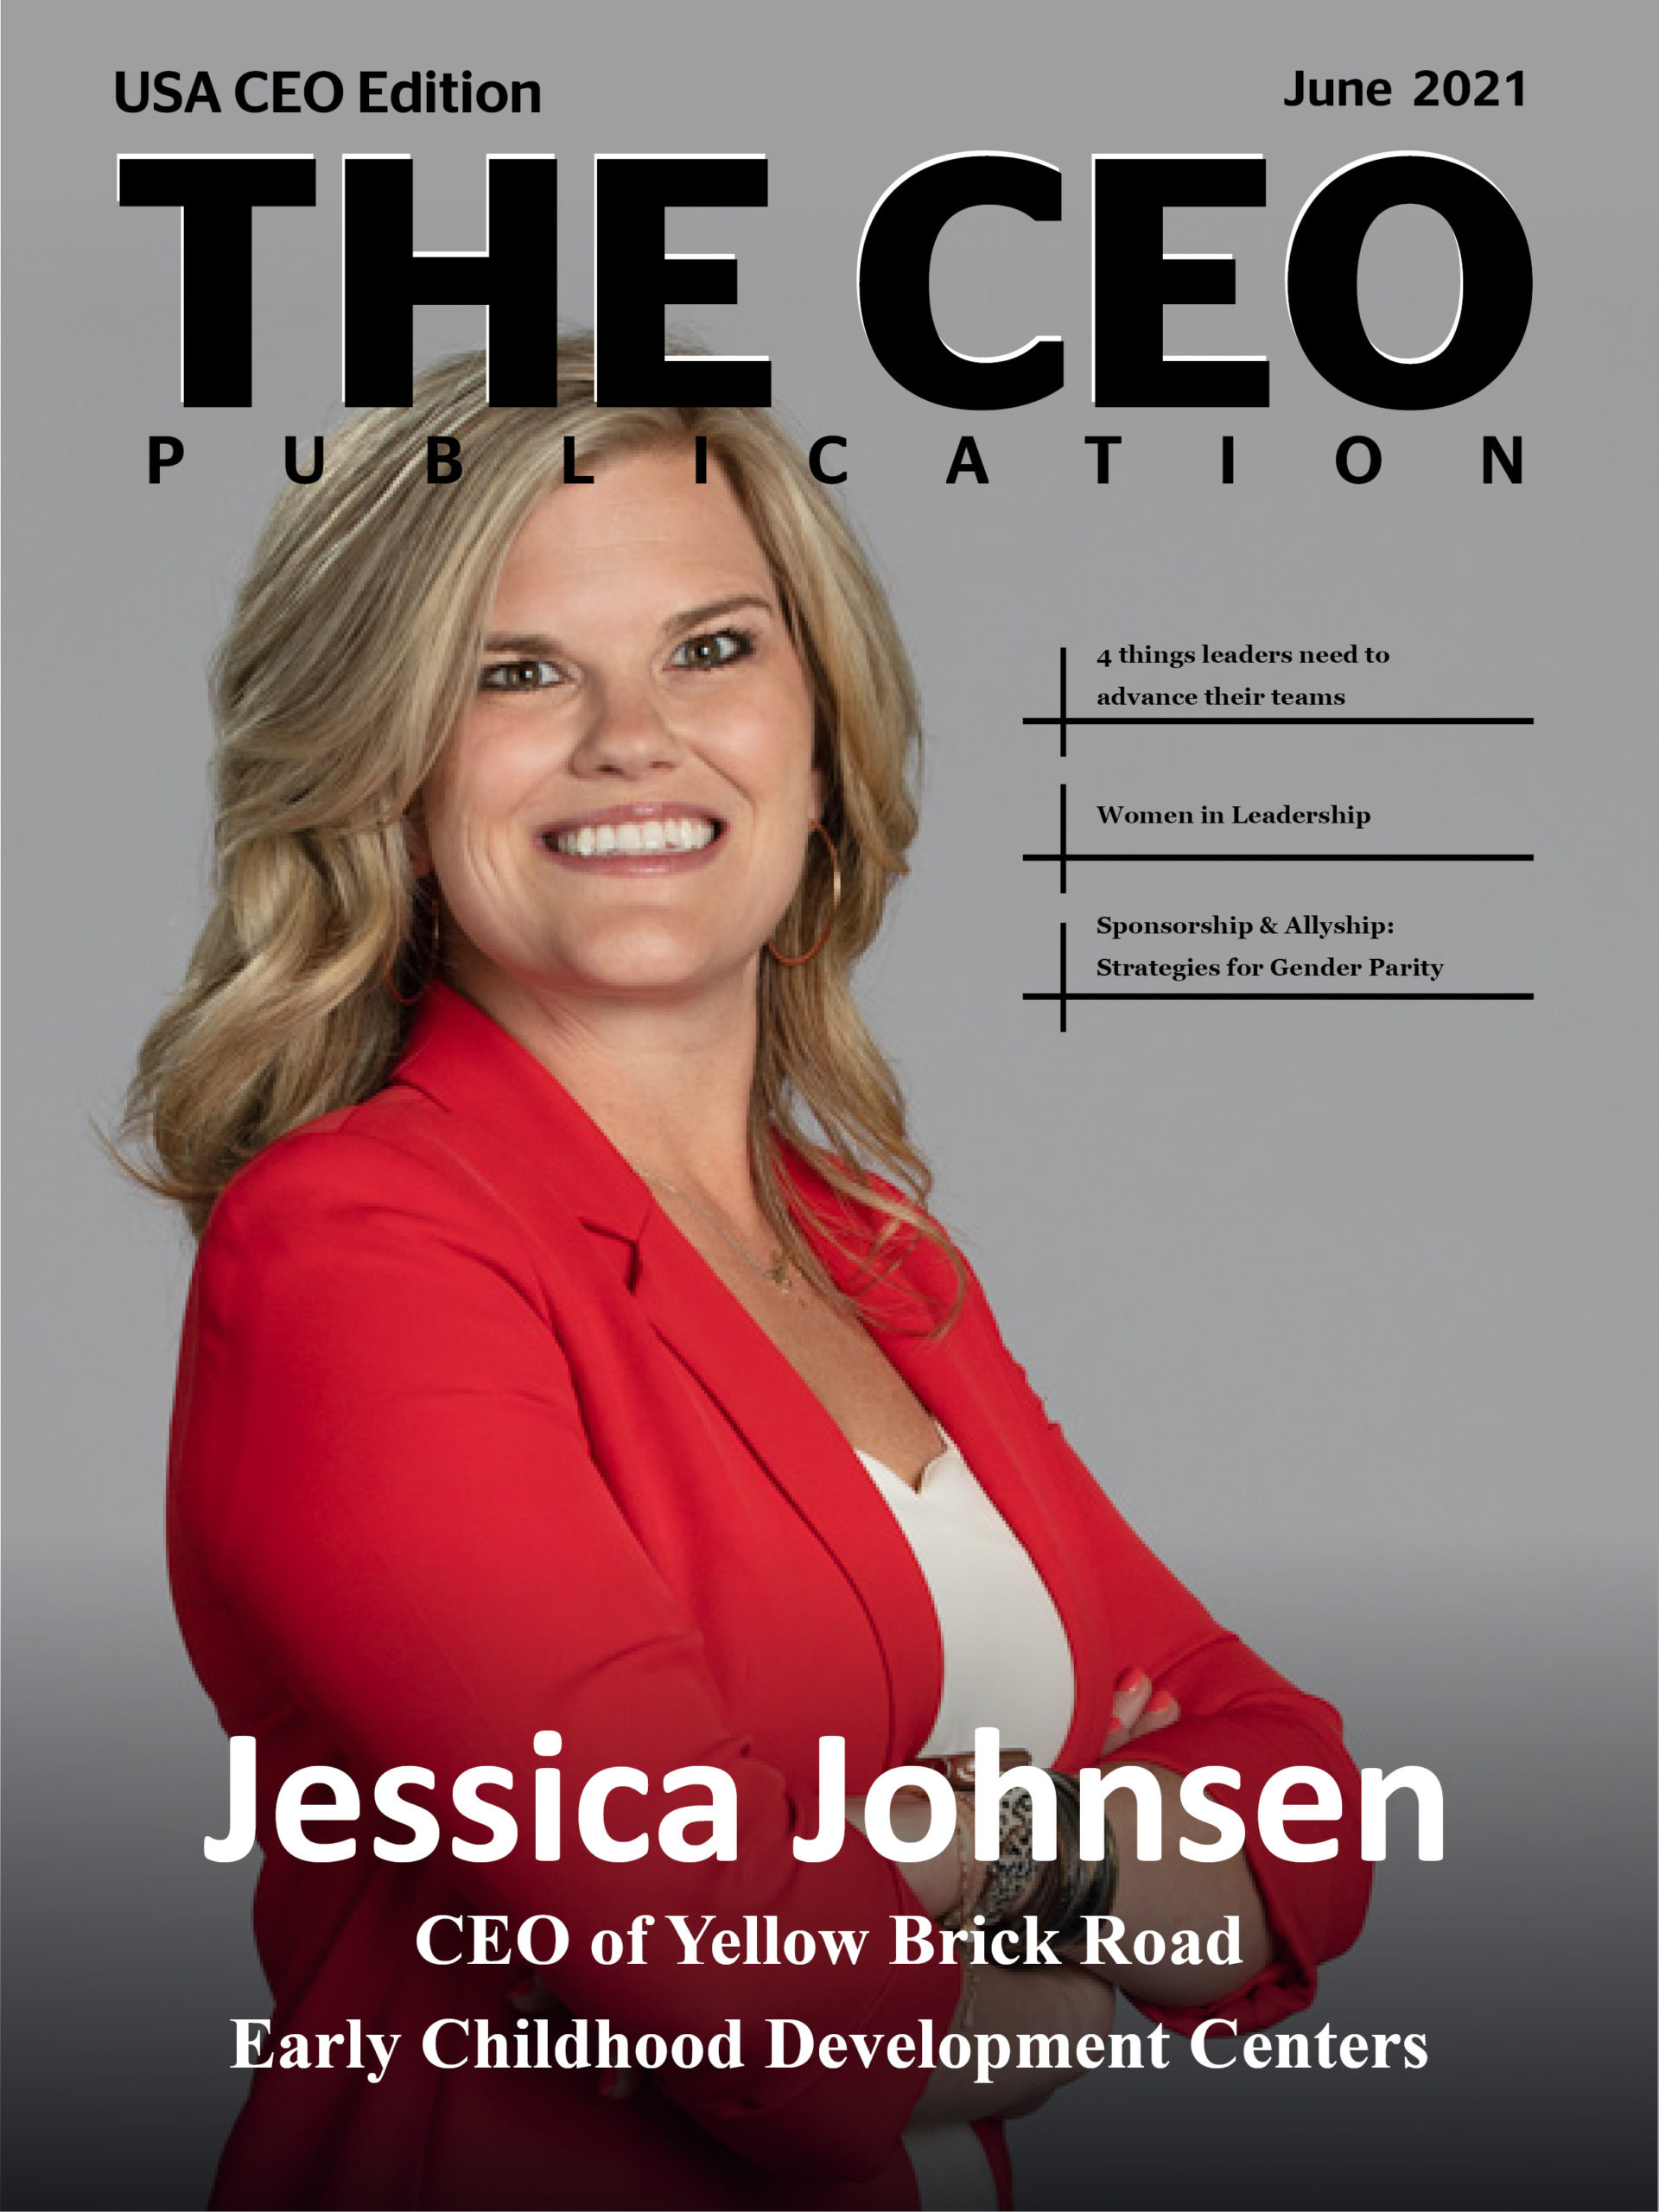 THE CEO - USA - Magazine cover page